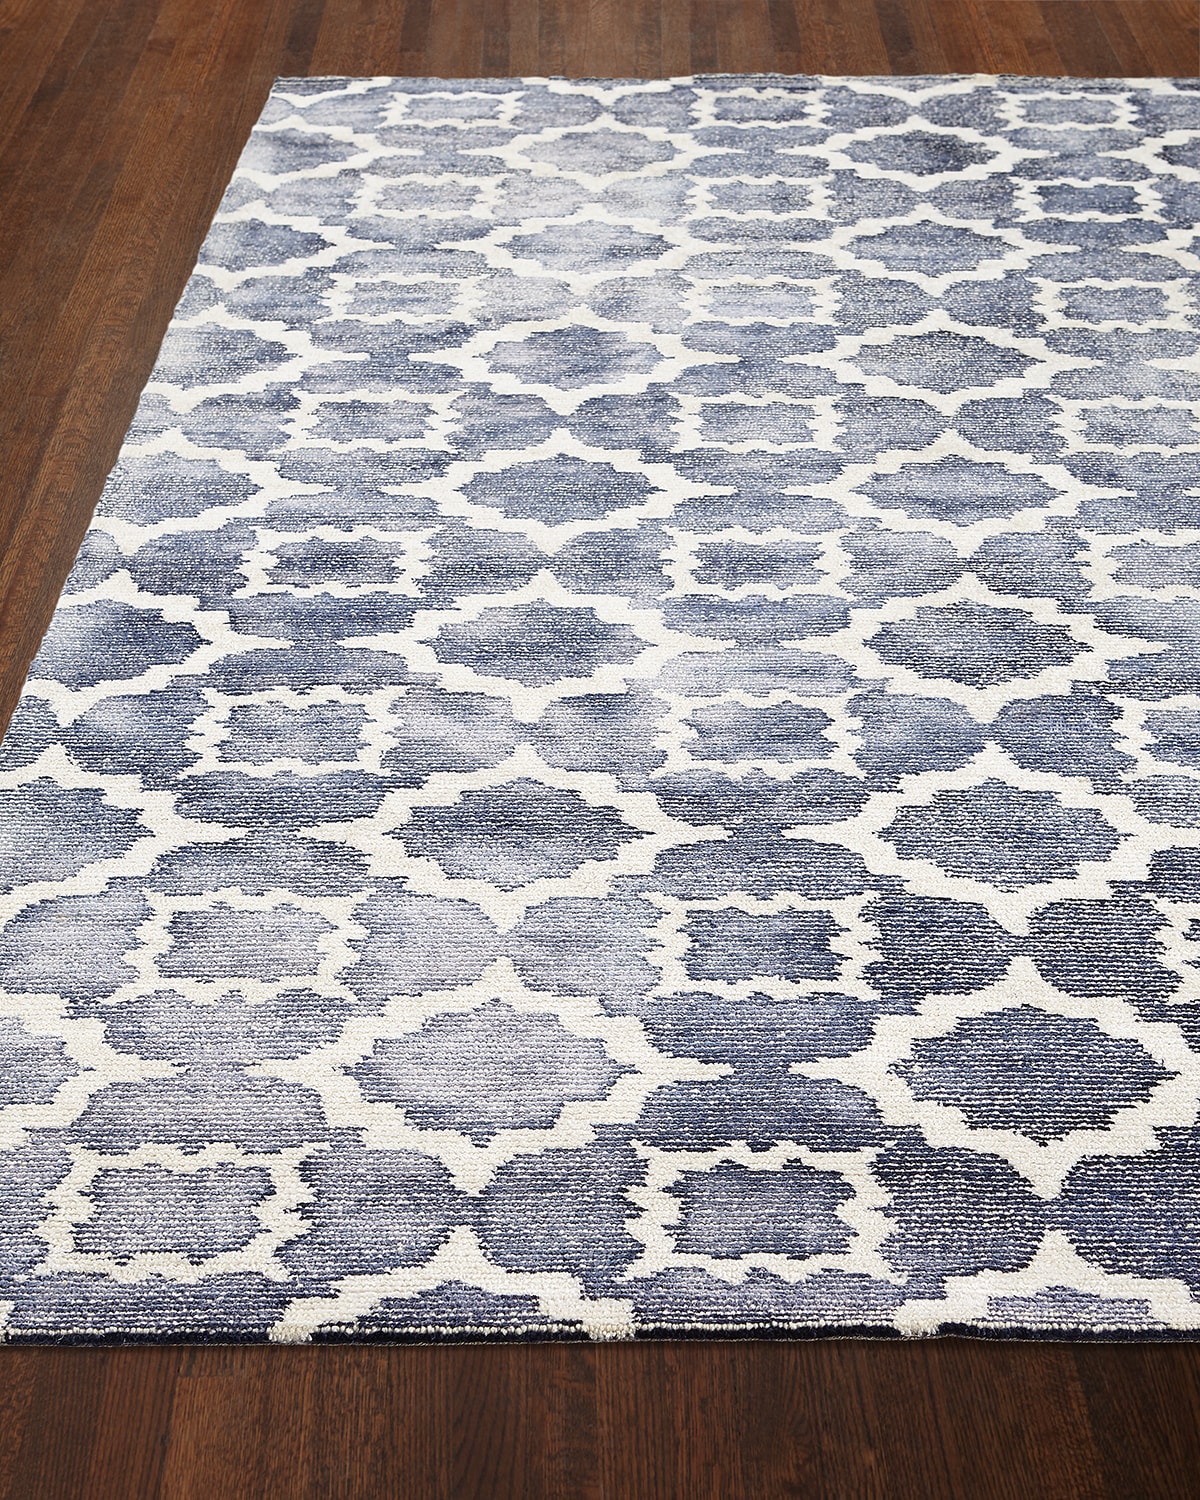 Image Dash & Albert Rug Company Reeve Hand-Knotted Runner, 2.5' x 8'